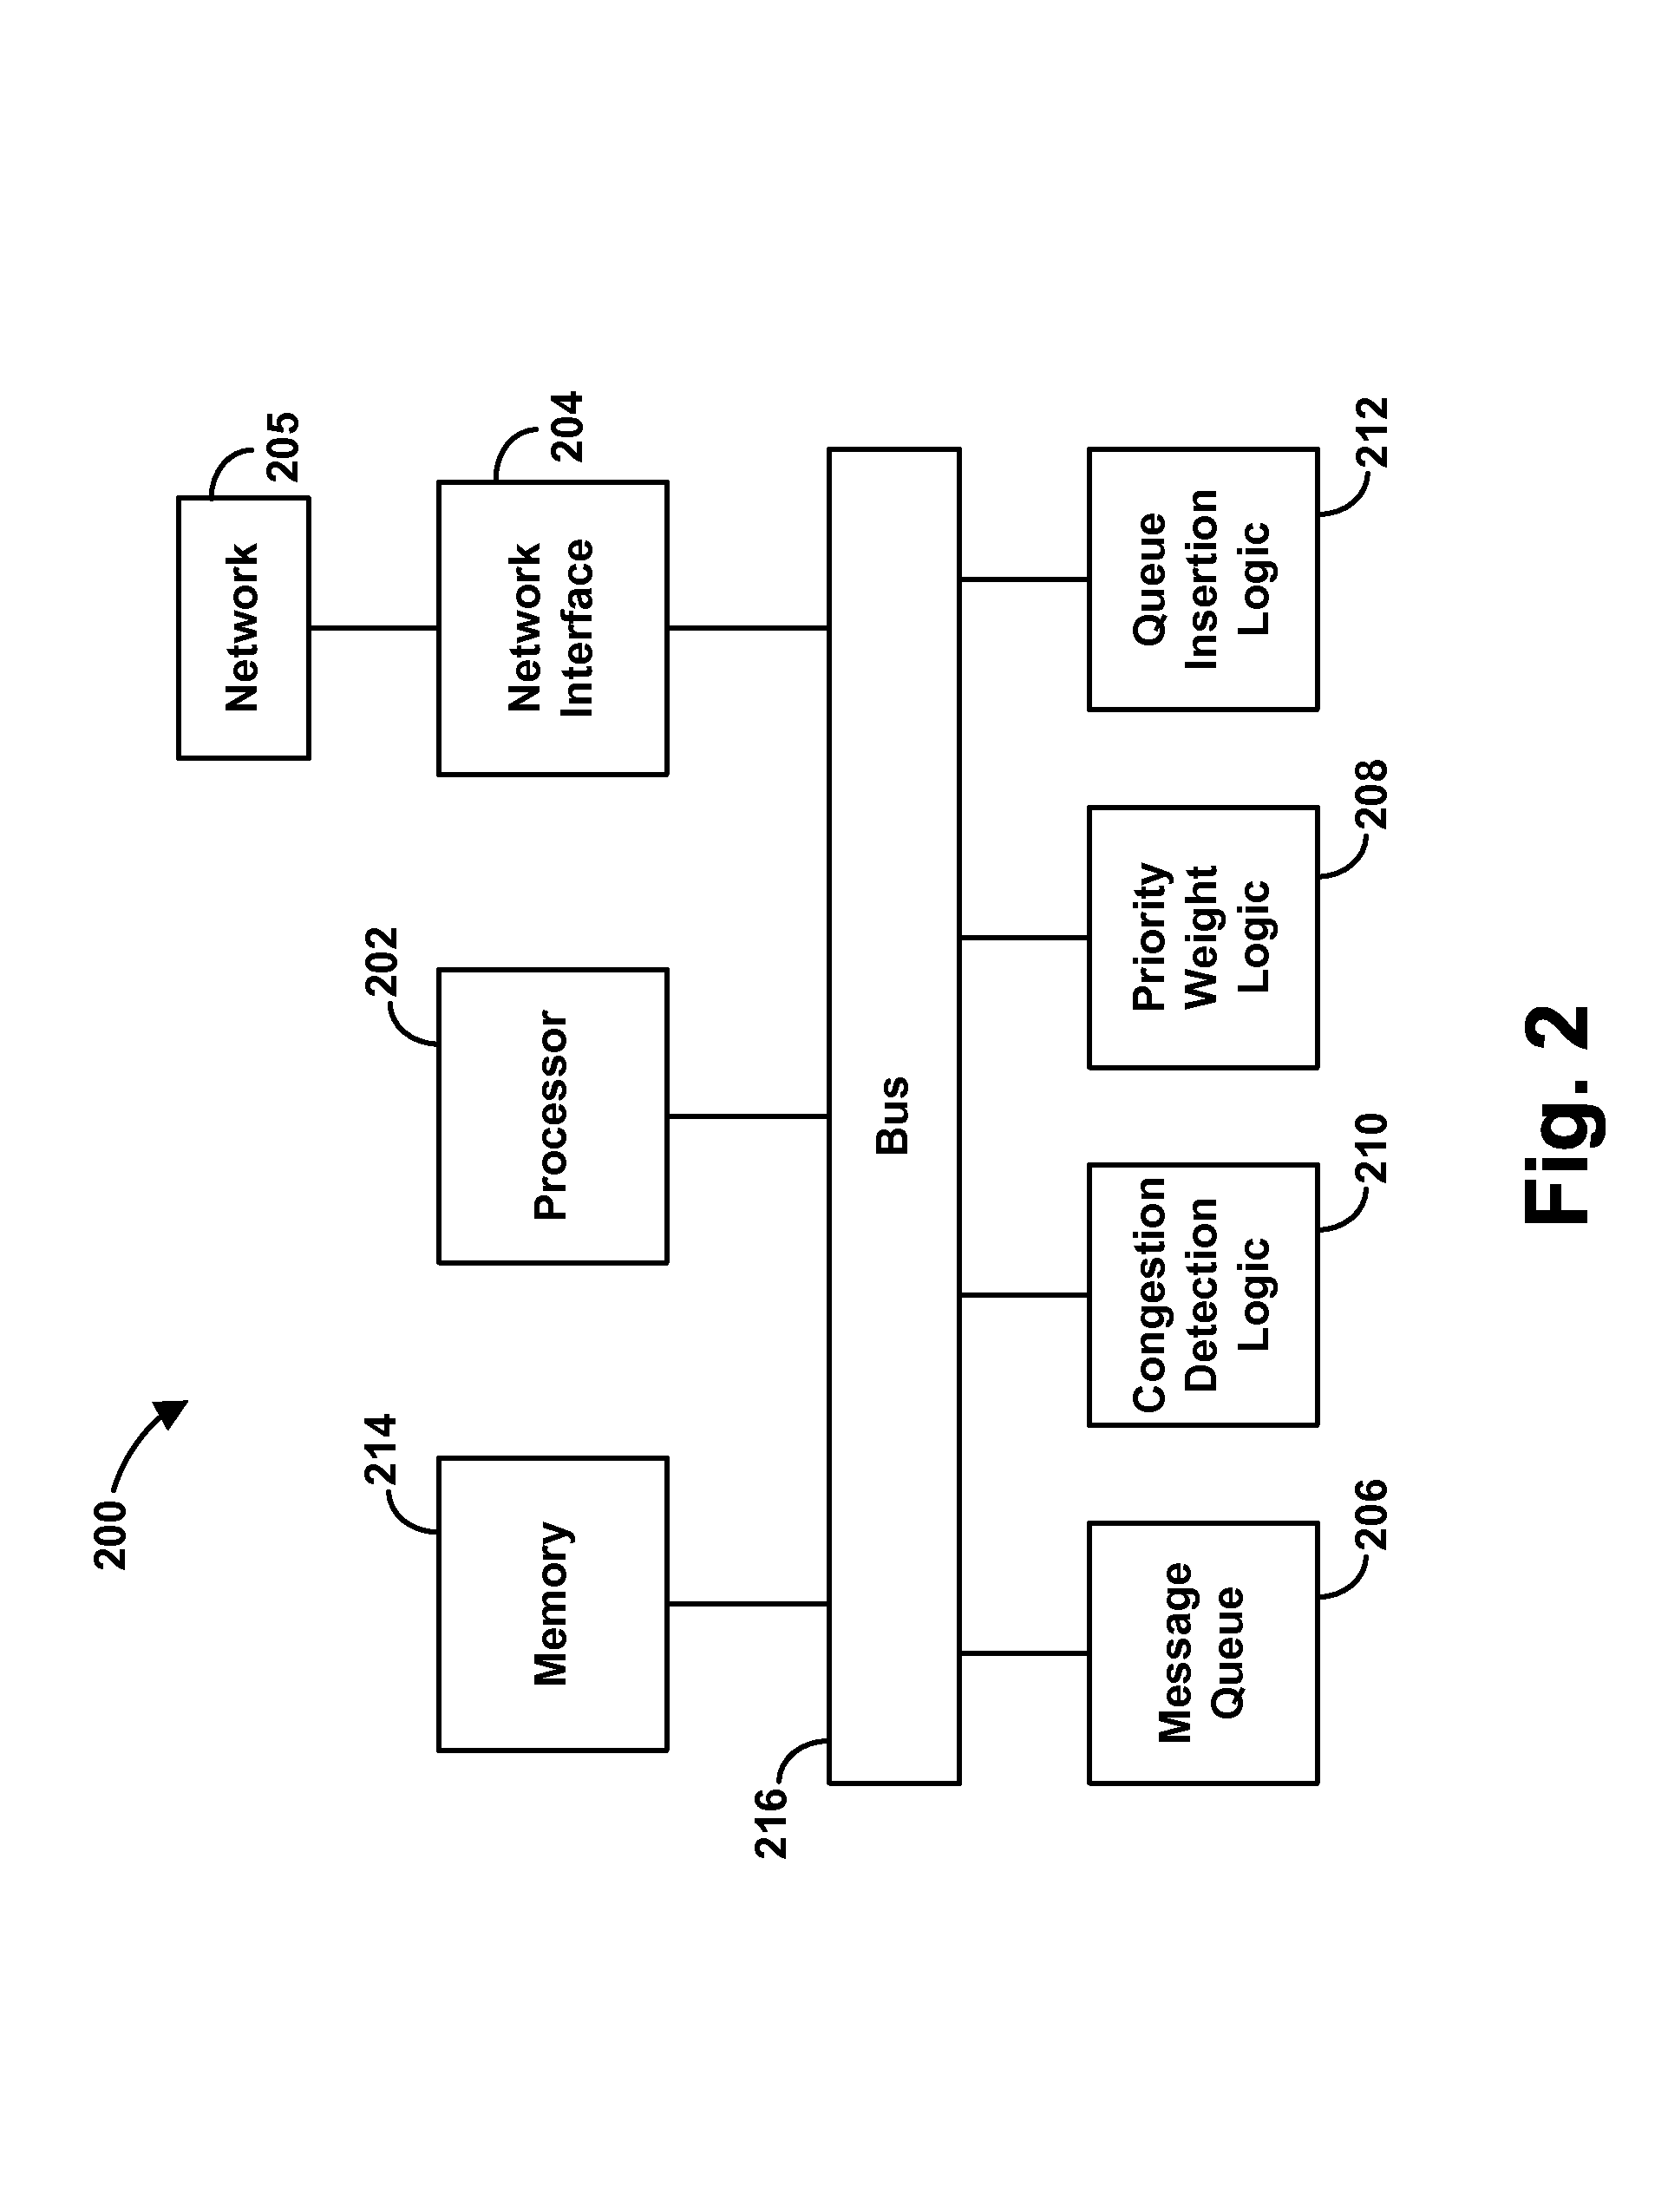 System and method for sorting instant messages